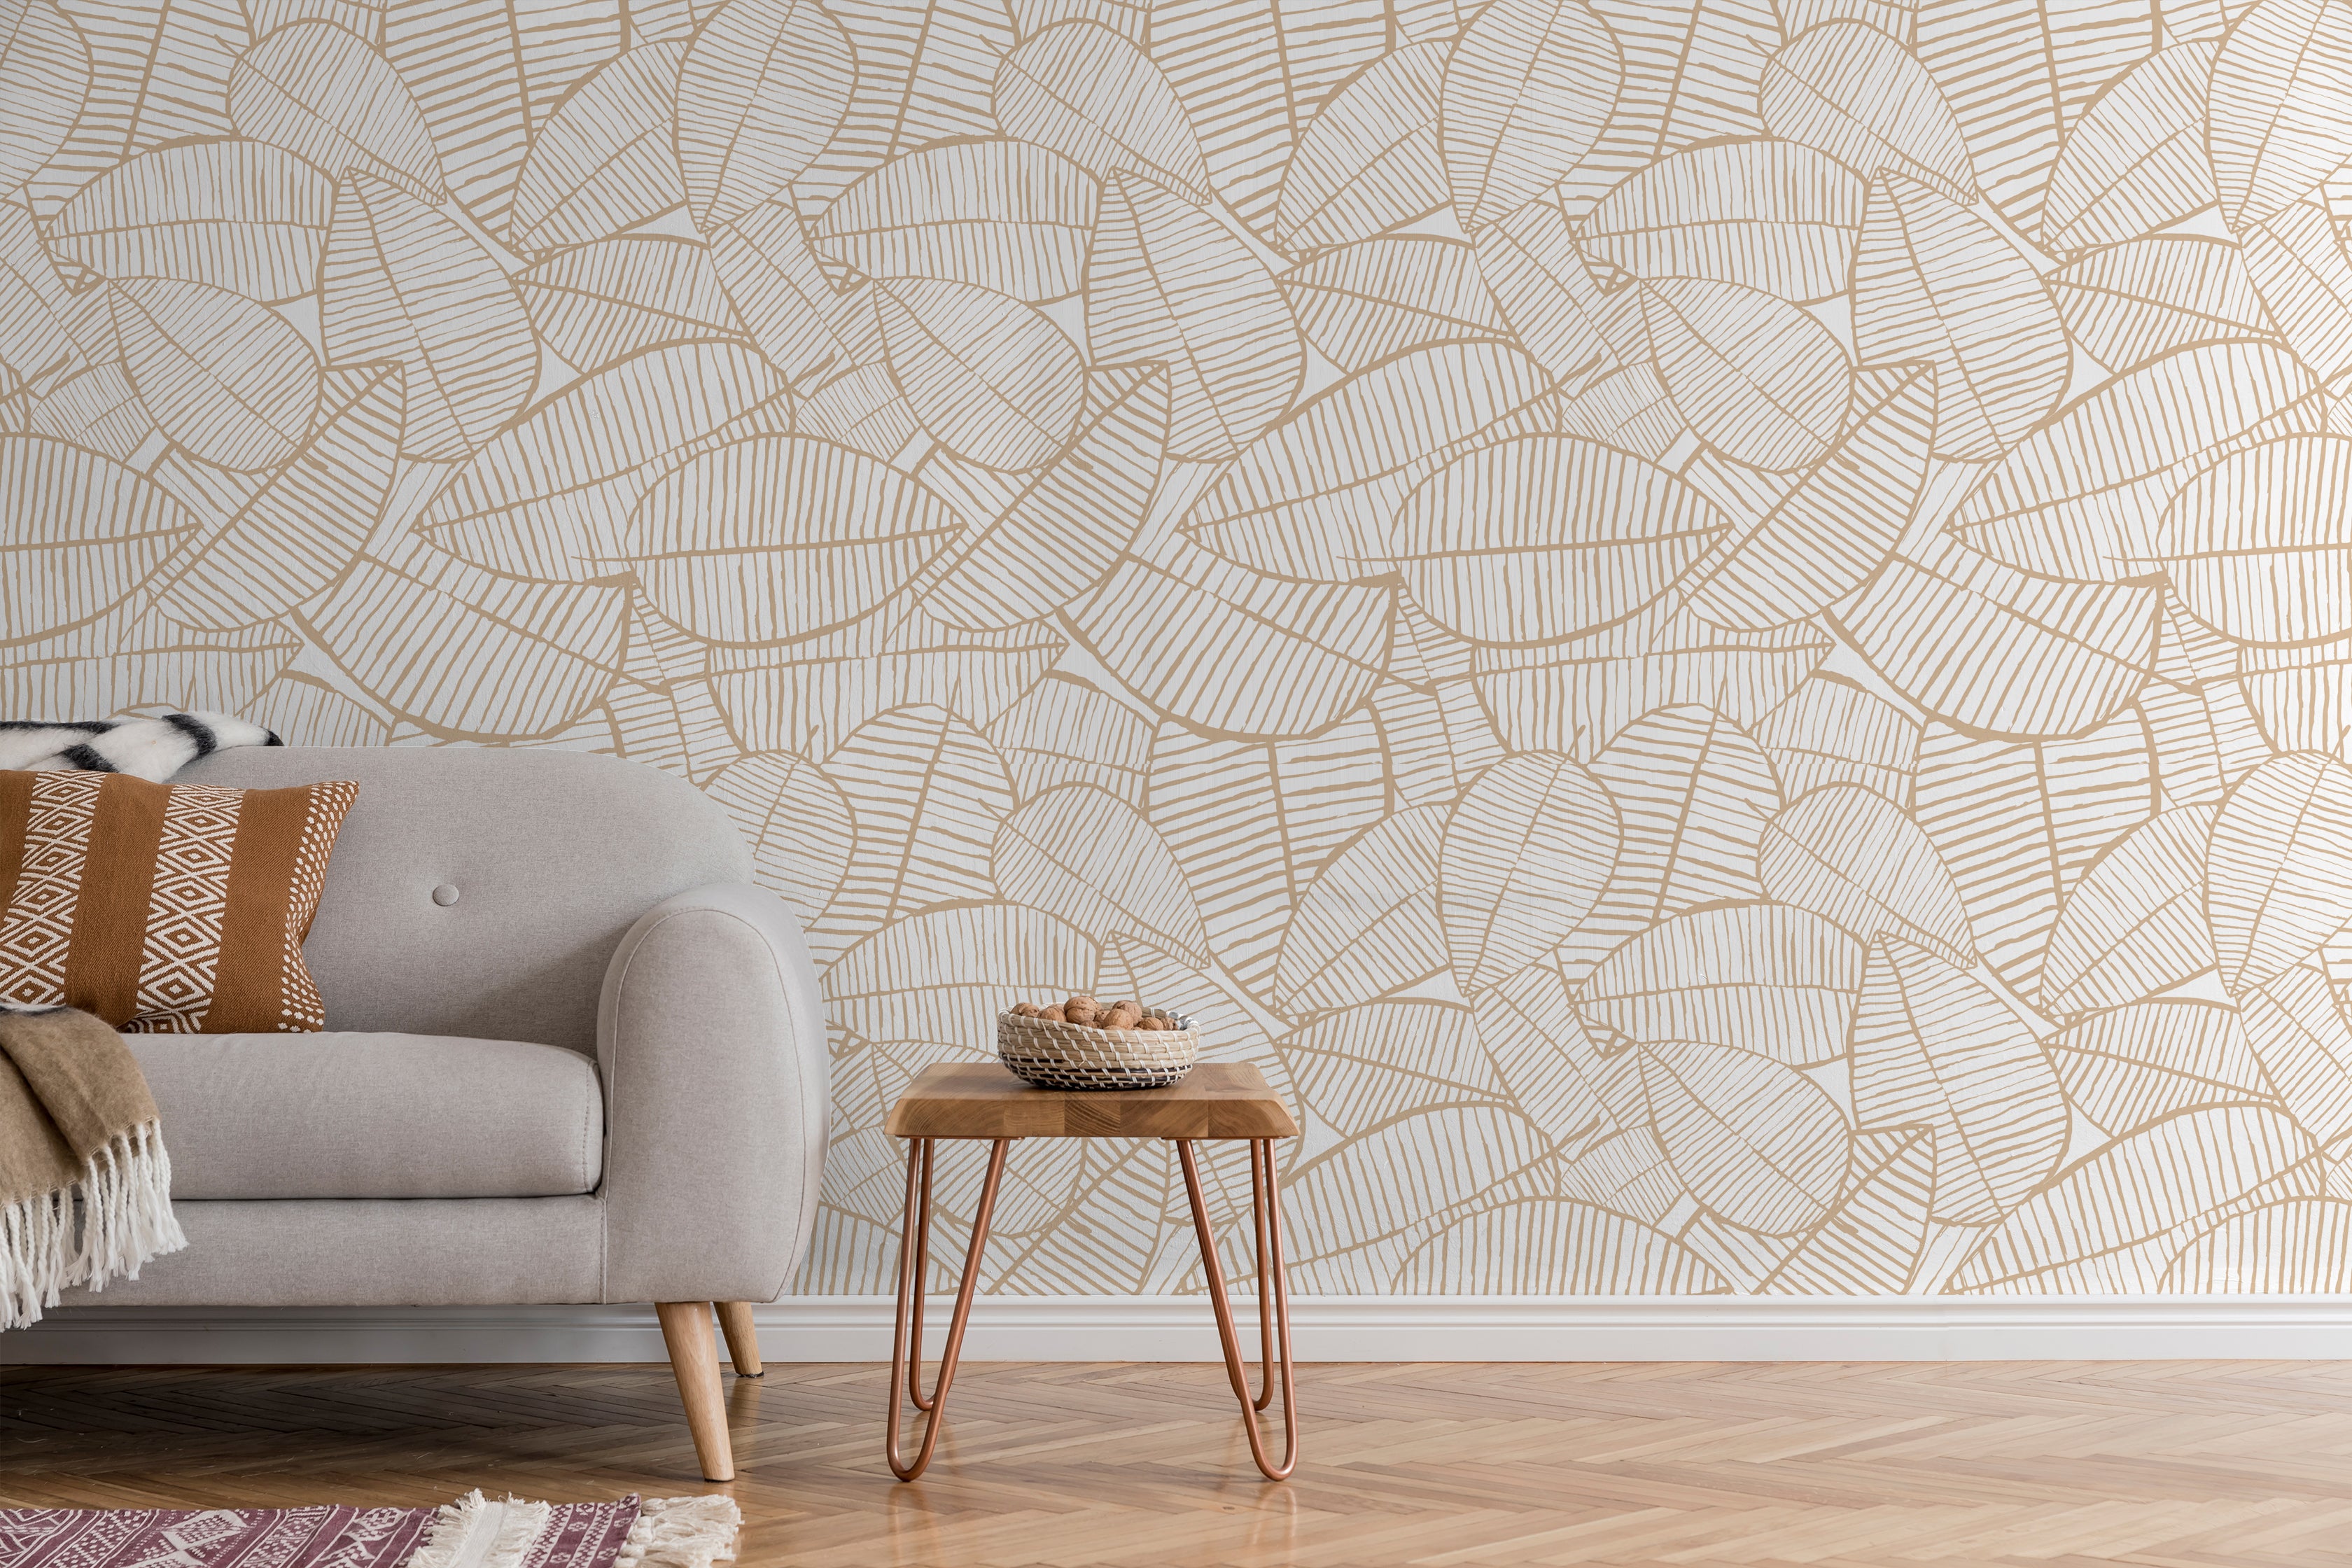 SALE - Canopy Leaves Wallpaper *Please read listing*